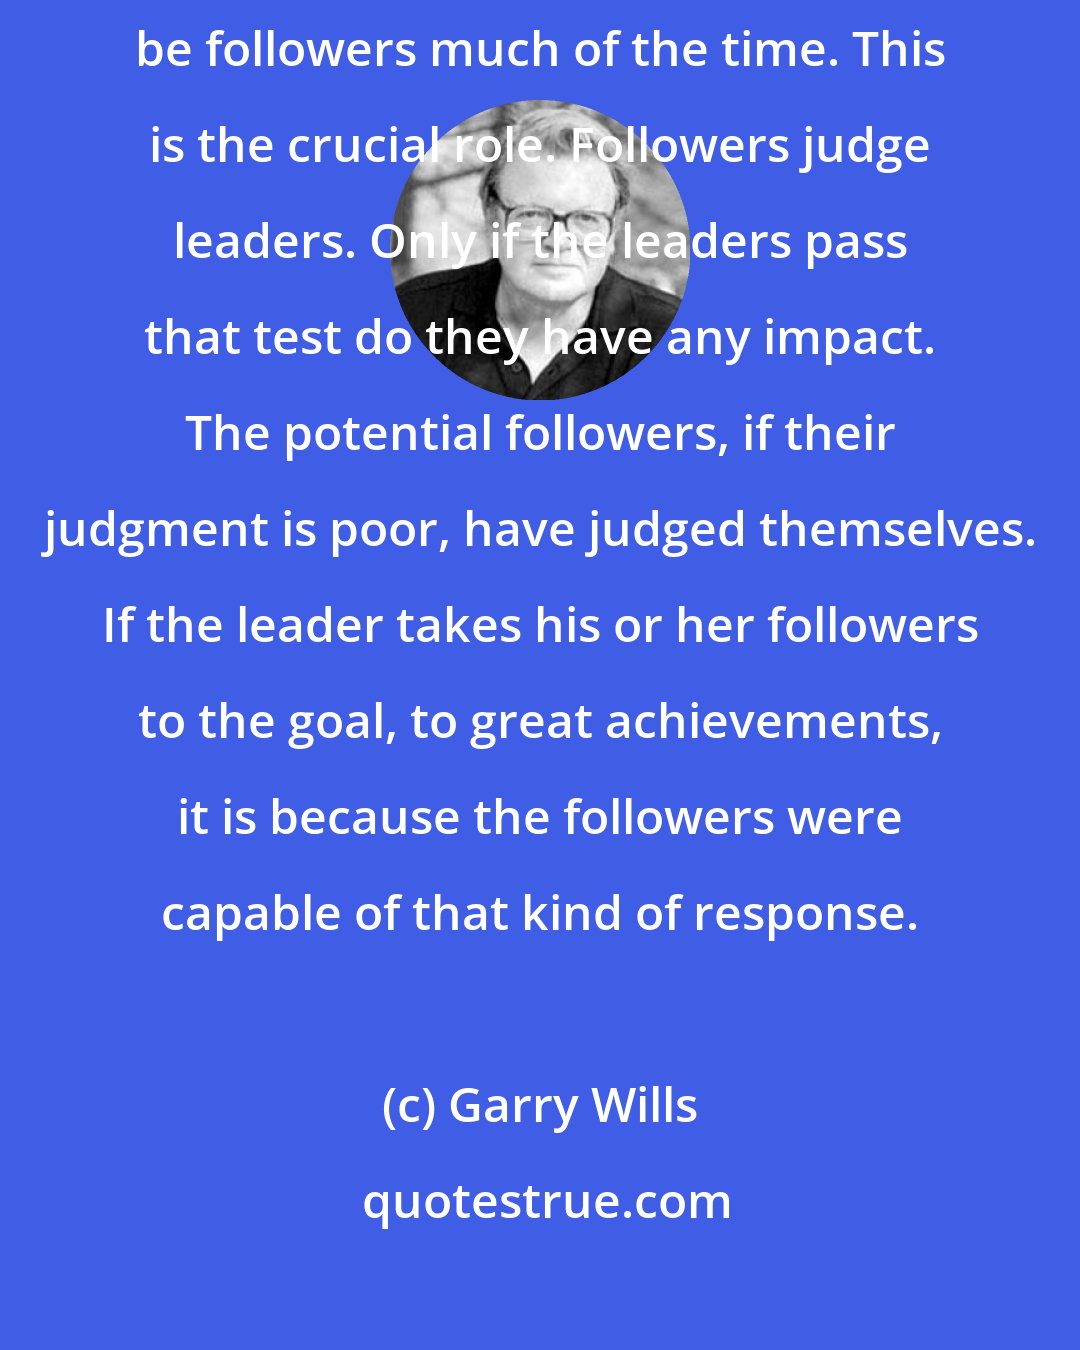 Garry Wills: Not many of us will be leaders; and even those who are leaders must also be followers much of the time. This is the crucial role. Followers judge leaders. Only if the leaders pass that test do they have any impact. The potential followers, if their judgment is poor, have judged themselves. If the leader takes his or her followers to the goal, to great achievements, it is because the followers were capable of that kind of response.